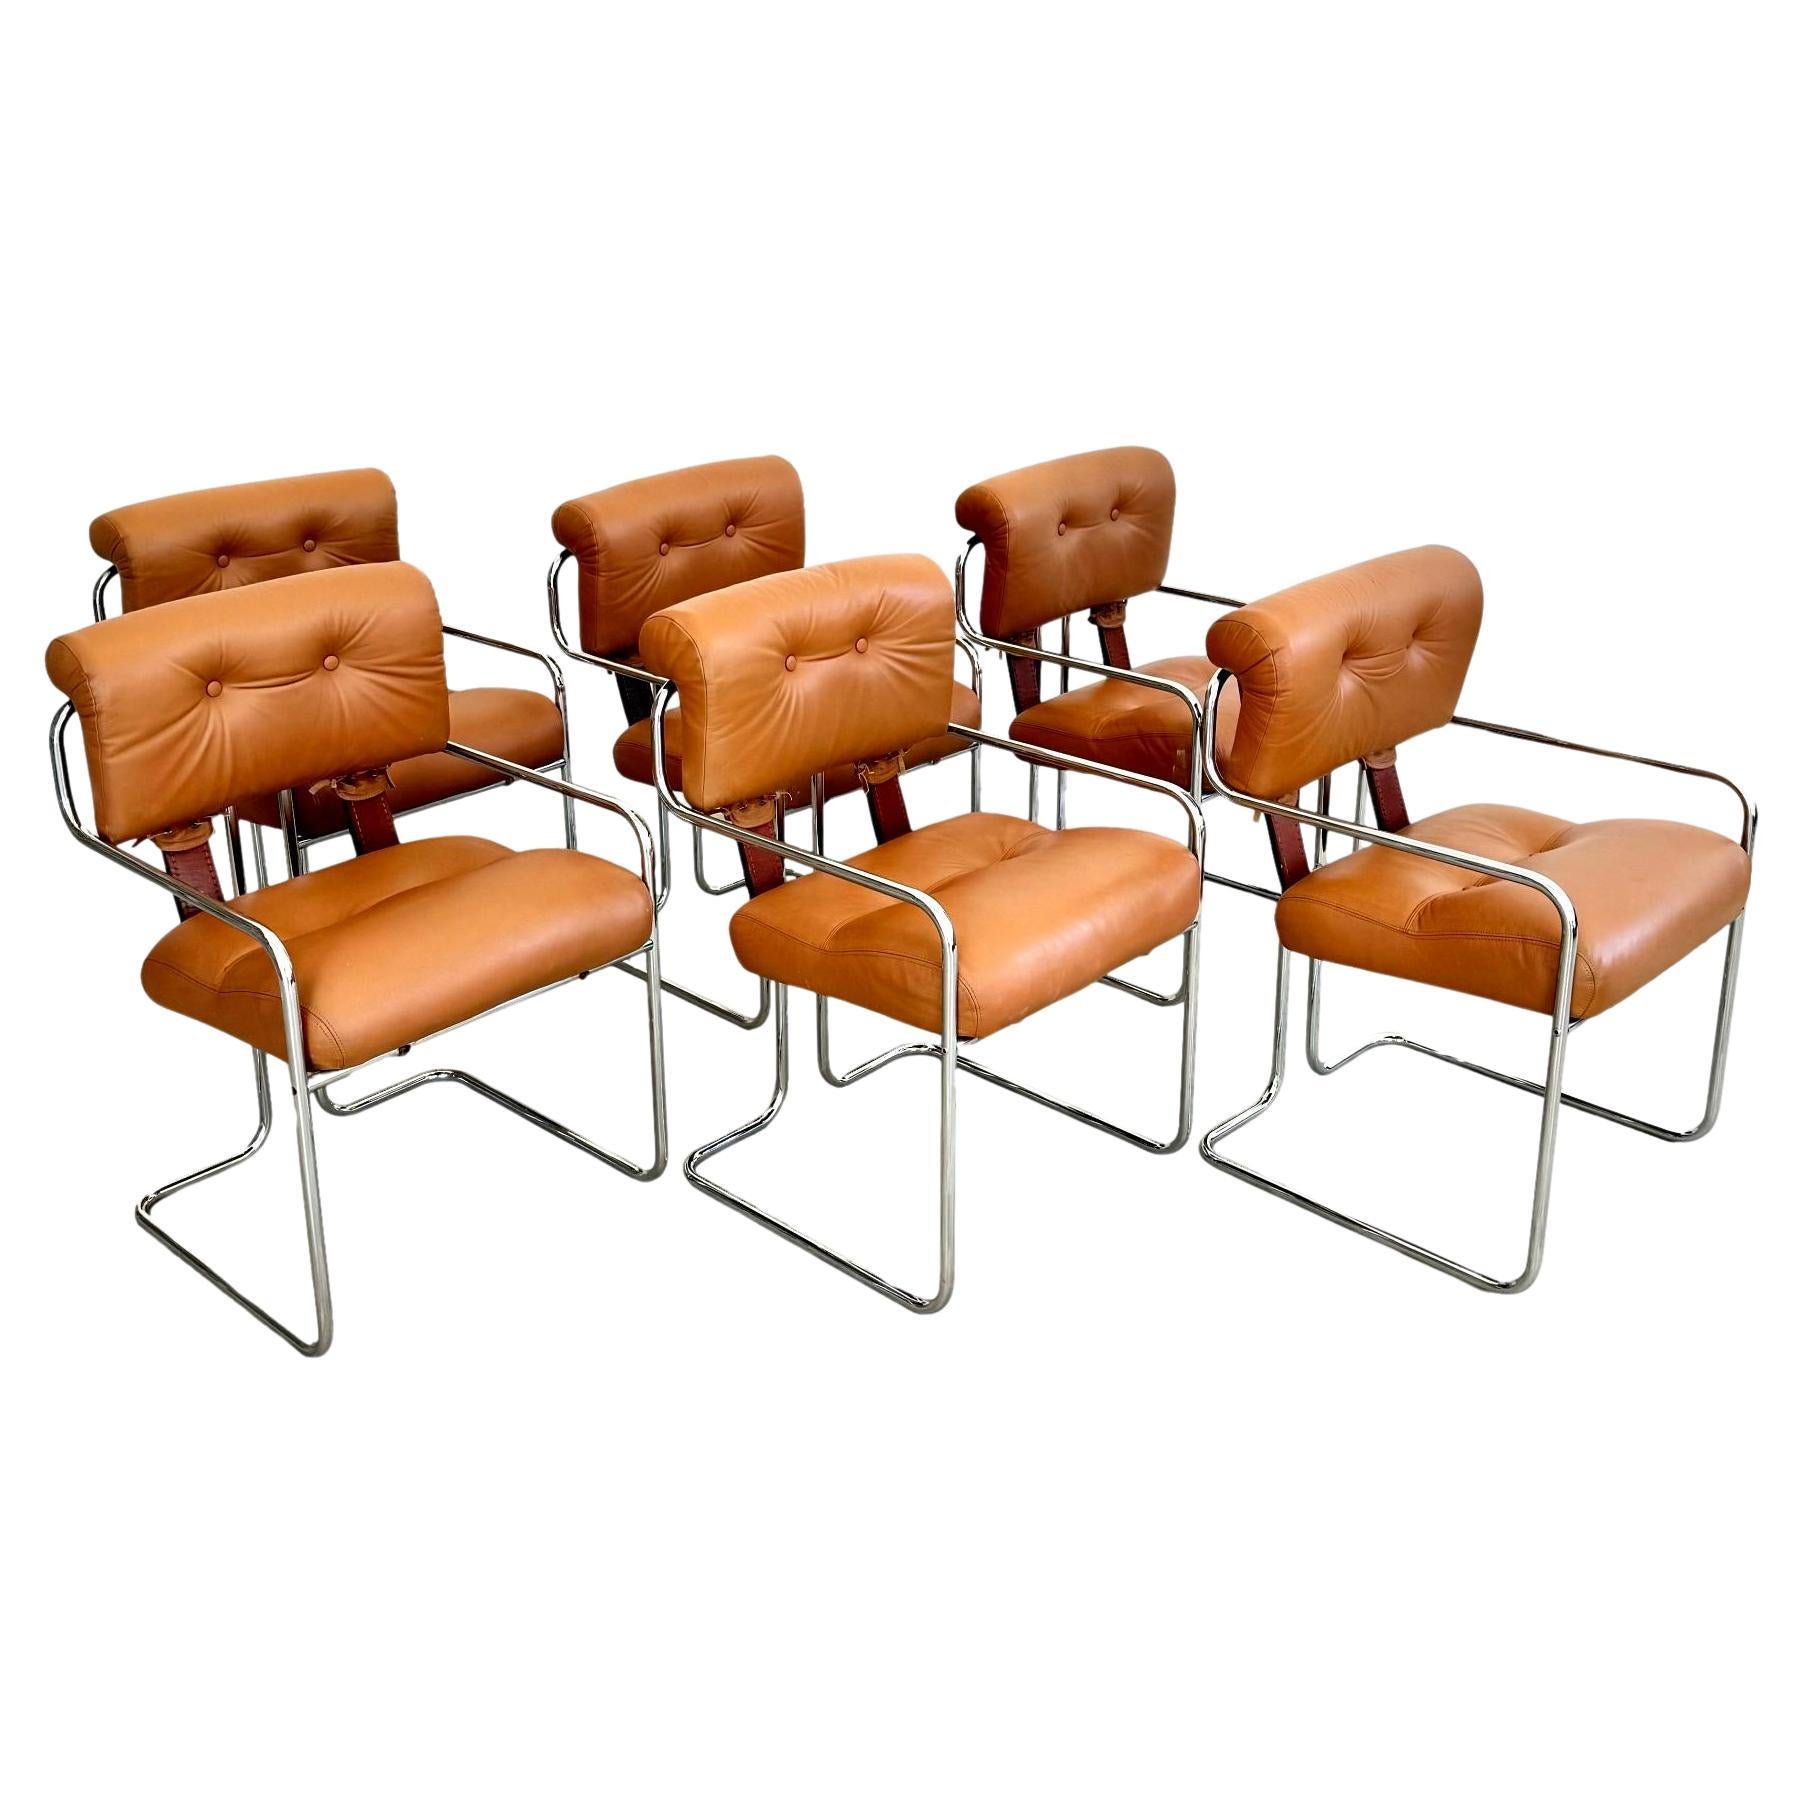 Set of 6 'Tucroma' Chairs in Tan by Guido Faleschini, 1970s Italy For Sale